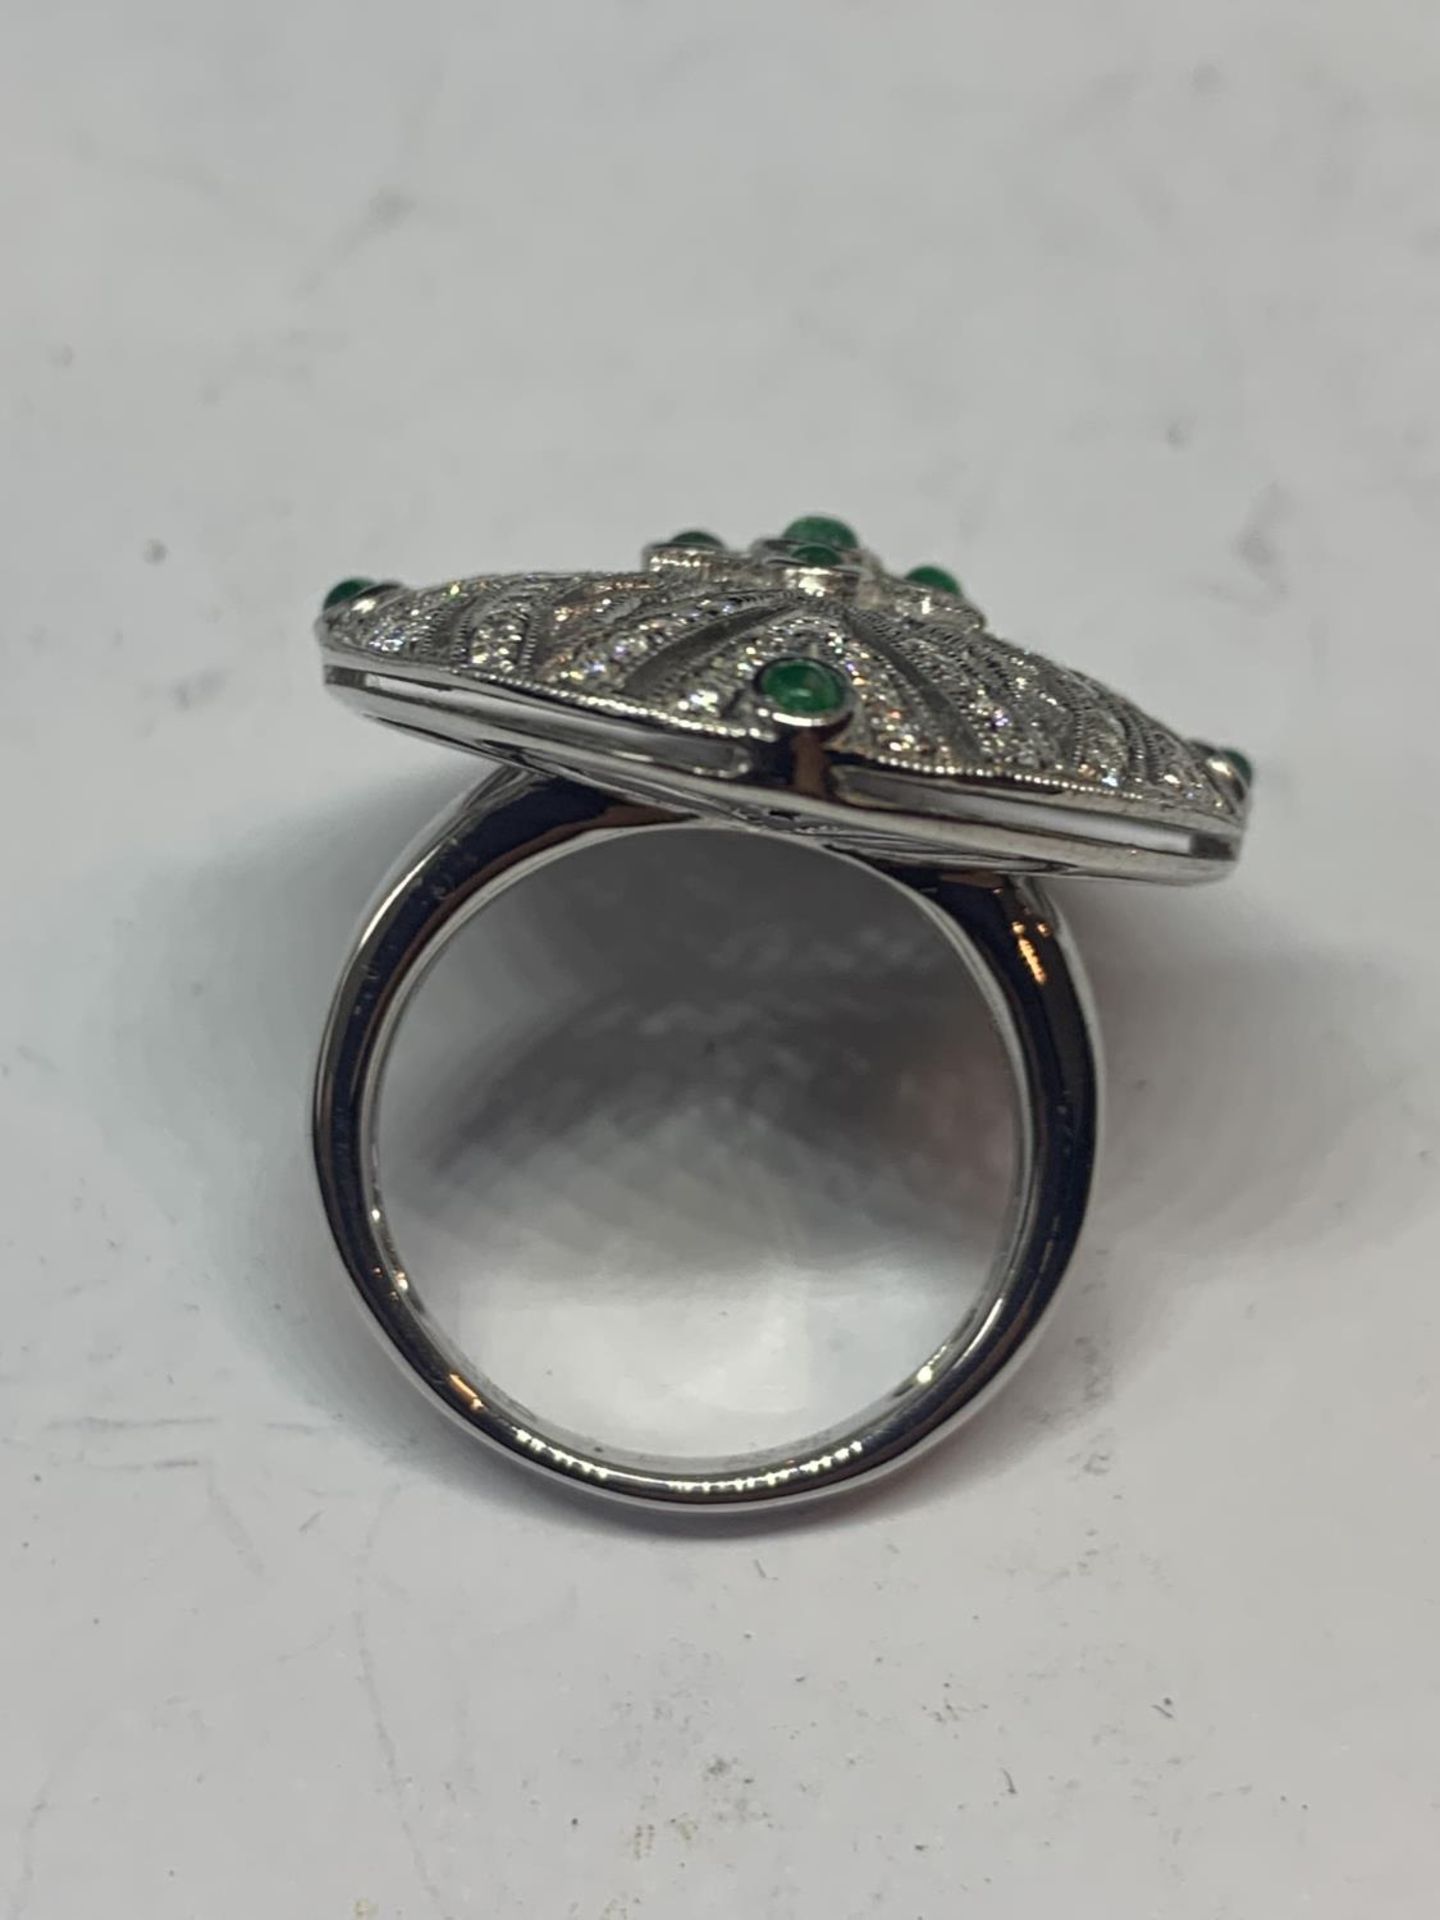 AN 18 CARAT WHITE GOLD DIAMOND AND EMERALD COCKTAIL RING GROSS WEIGHT 13.2 GRAMS SIZE O/P - Image 6 of 8